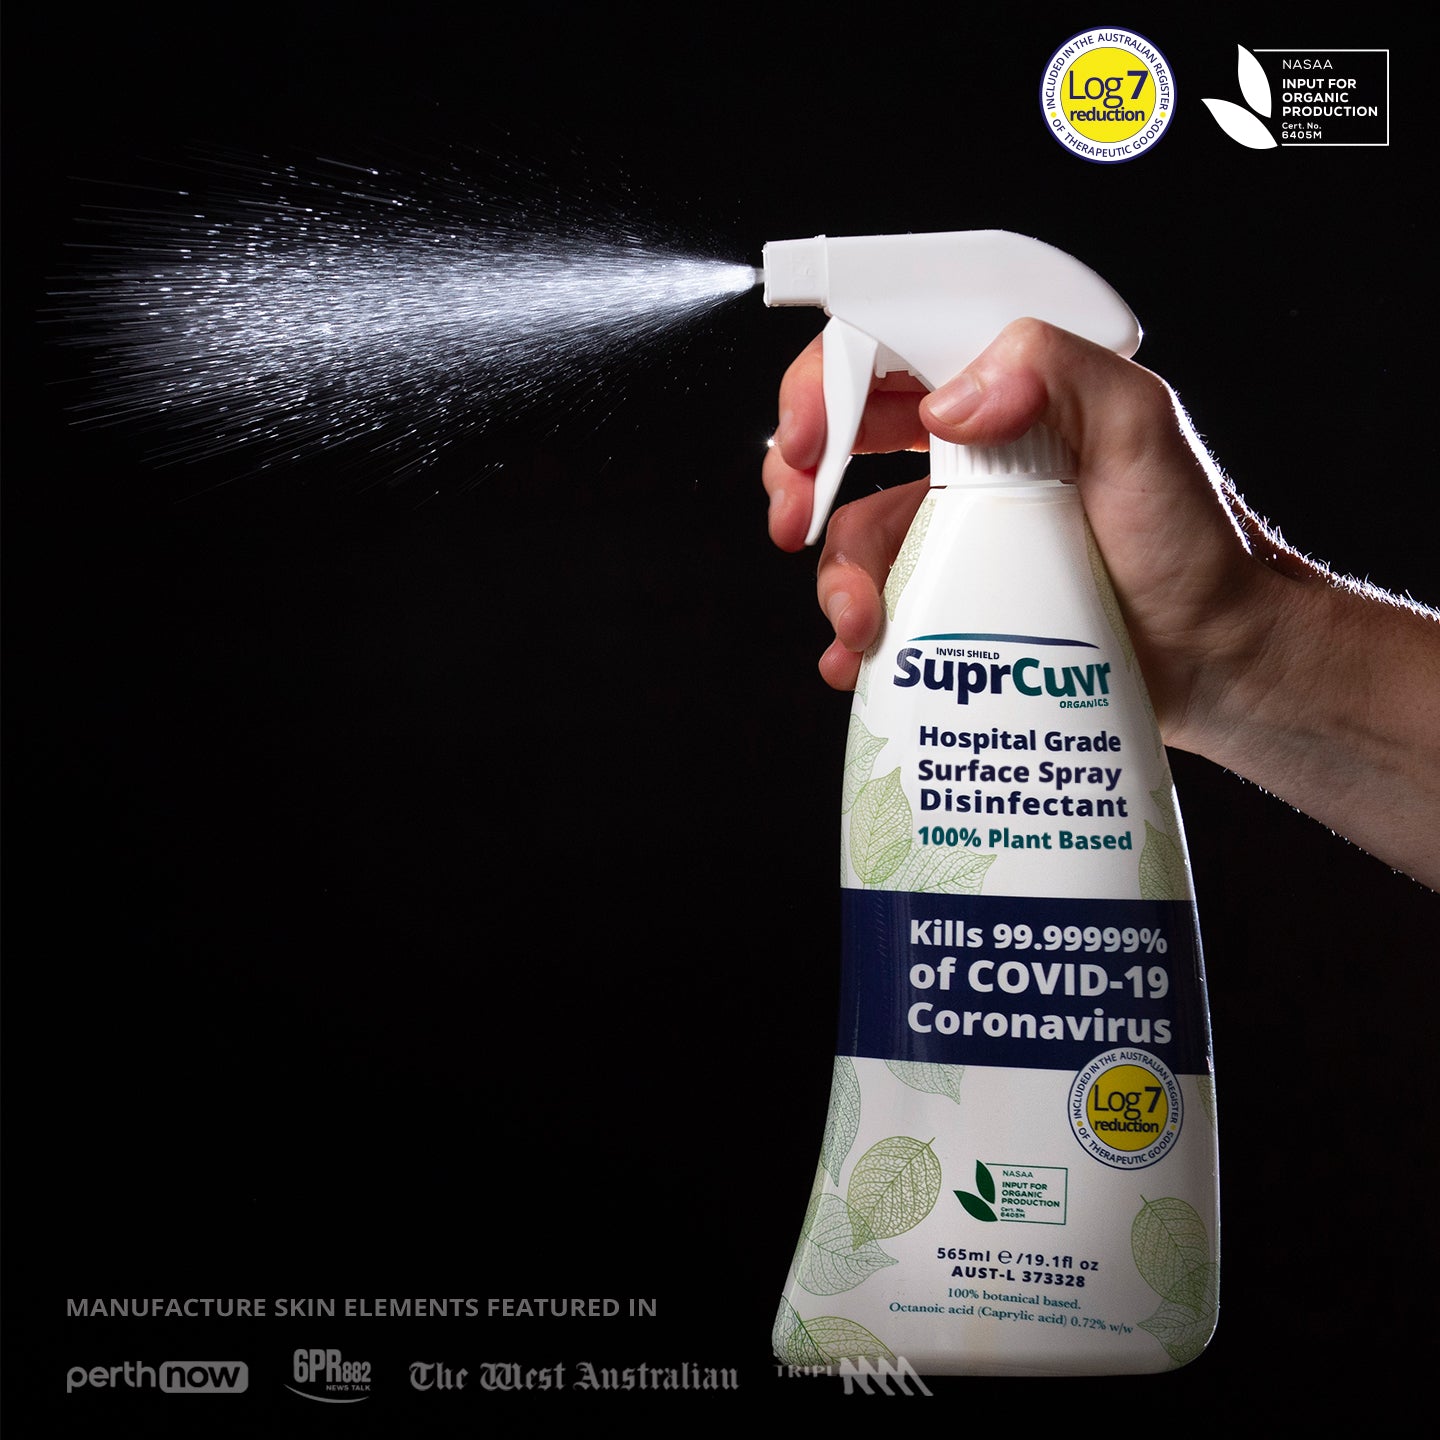 SuprCuvr Hospital Grade Disinfectant Surface Spray 565ml